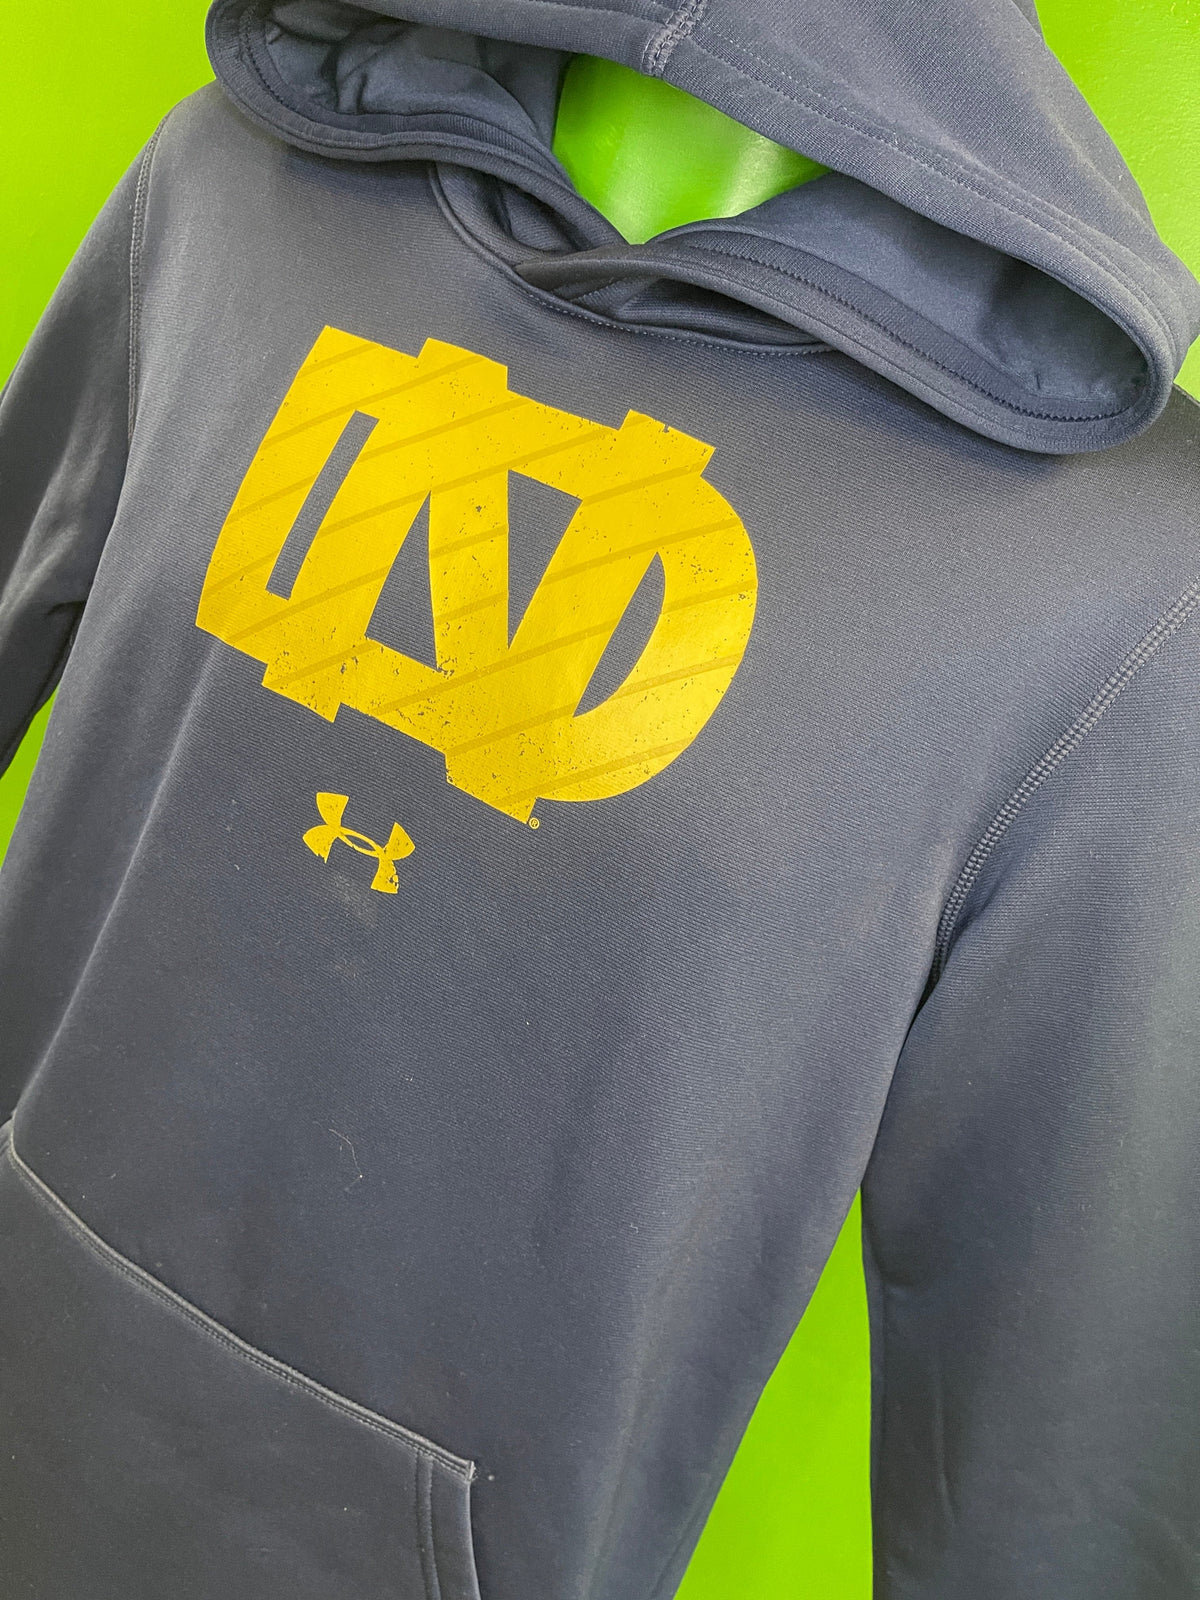 NCAA Notre Dame Fighting Irish Under Armour Hoodie Youth X-Large 18-20